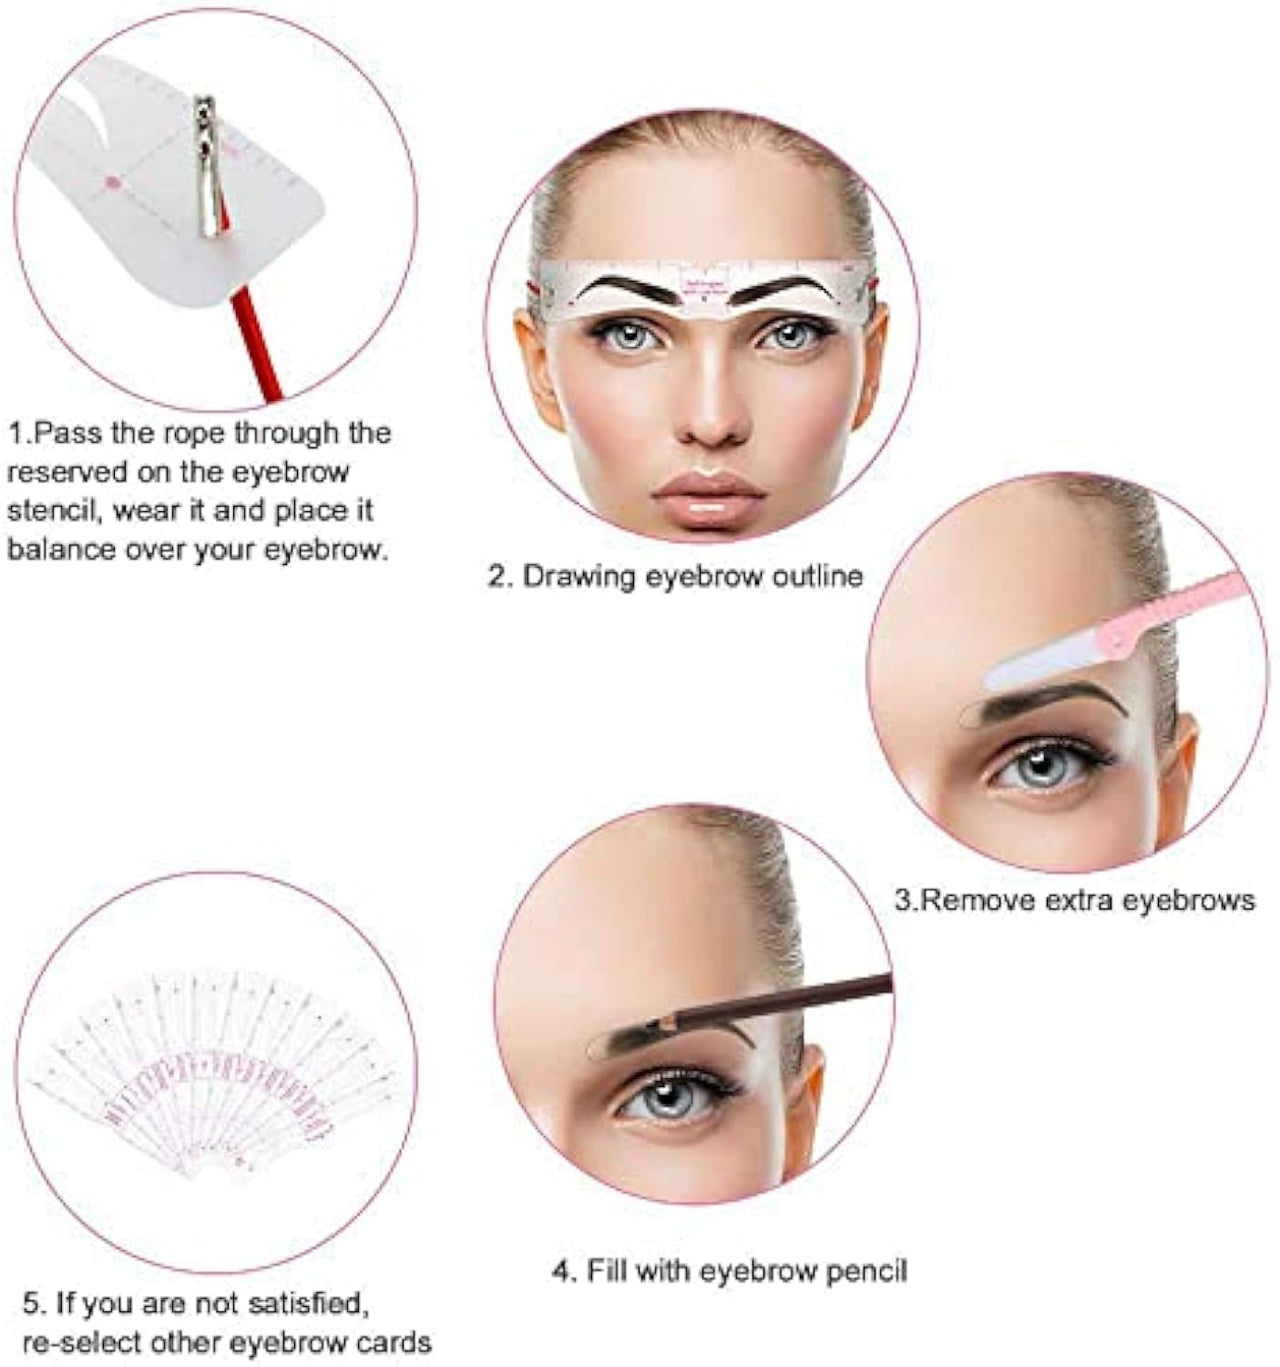 🌲 Early Christmas Sale - SAVE OFF 60% 🎁 Eyebrow Stamp Stencil Kit